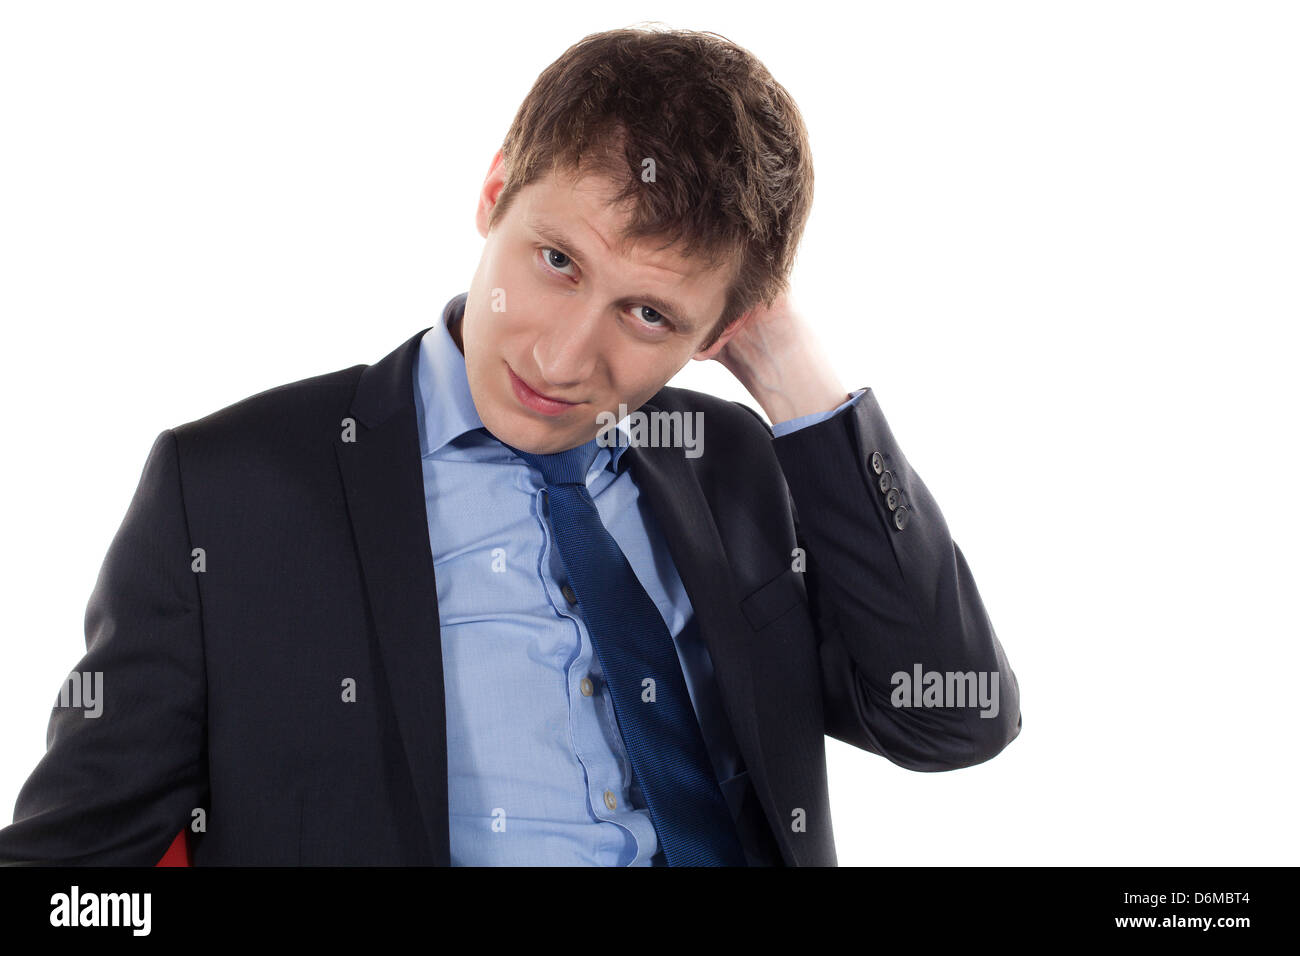 serious and tired young businessman on a whire background Stock Photo